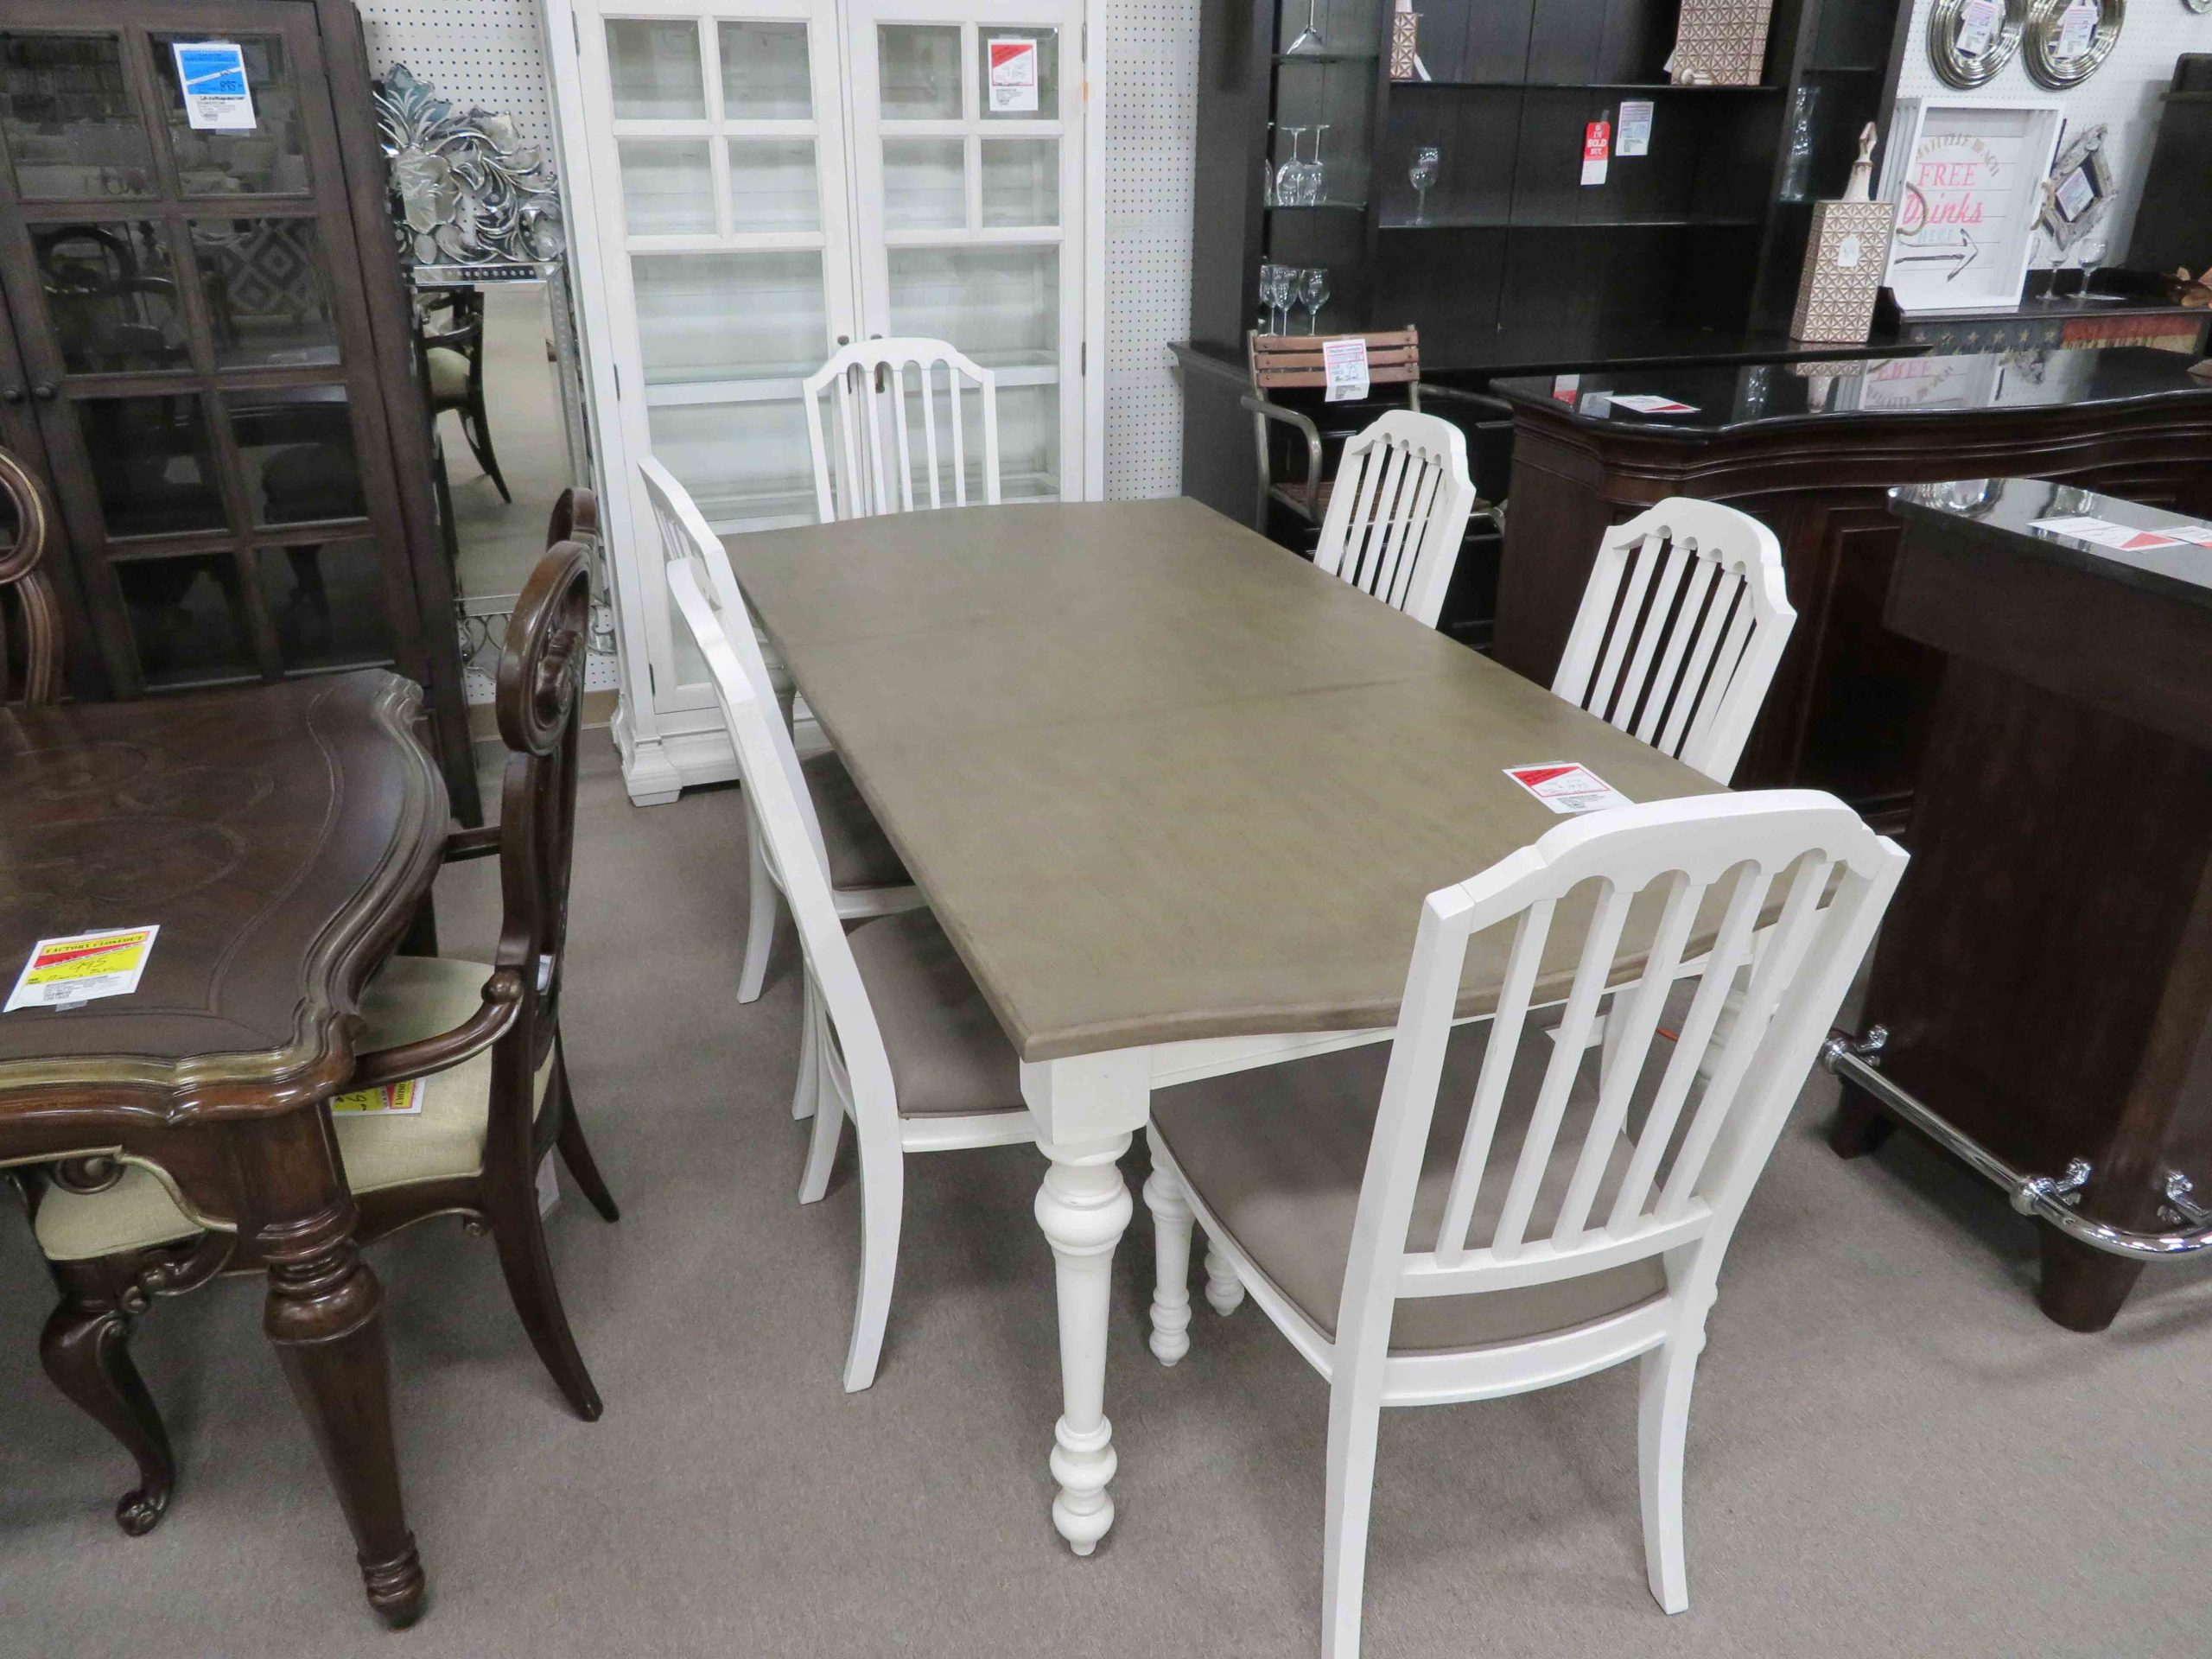 Unique Dining Room Furniture Raleigh Nc for Small Space